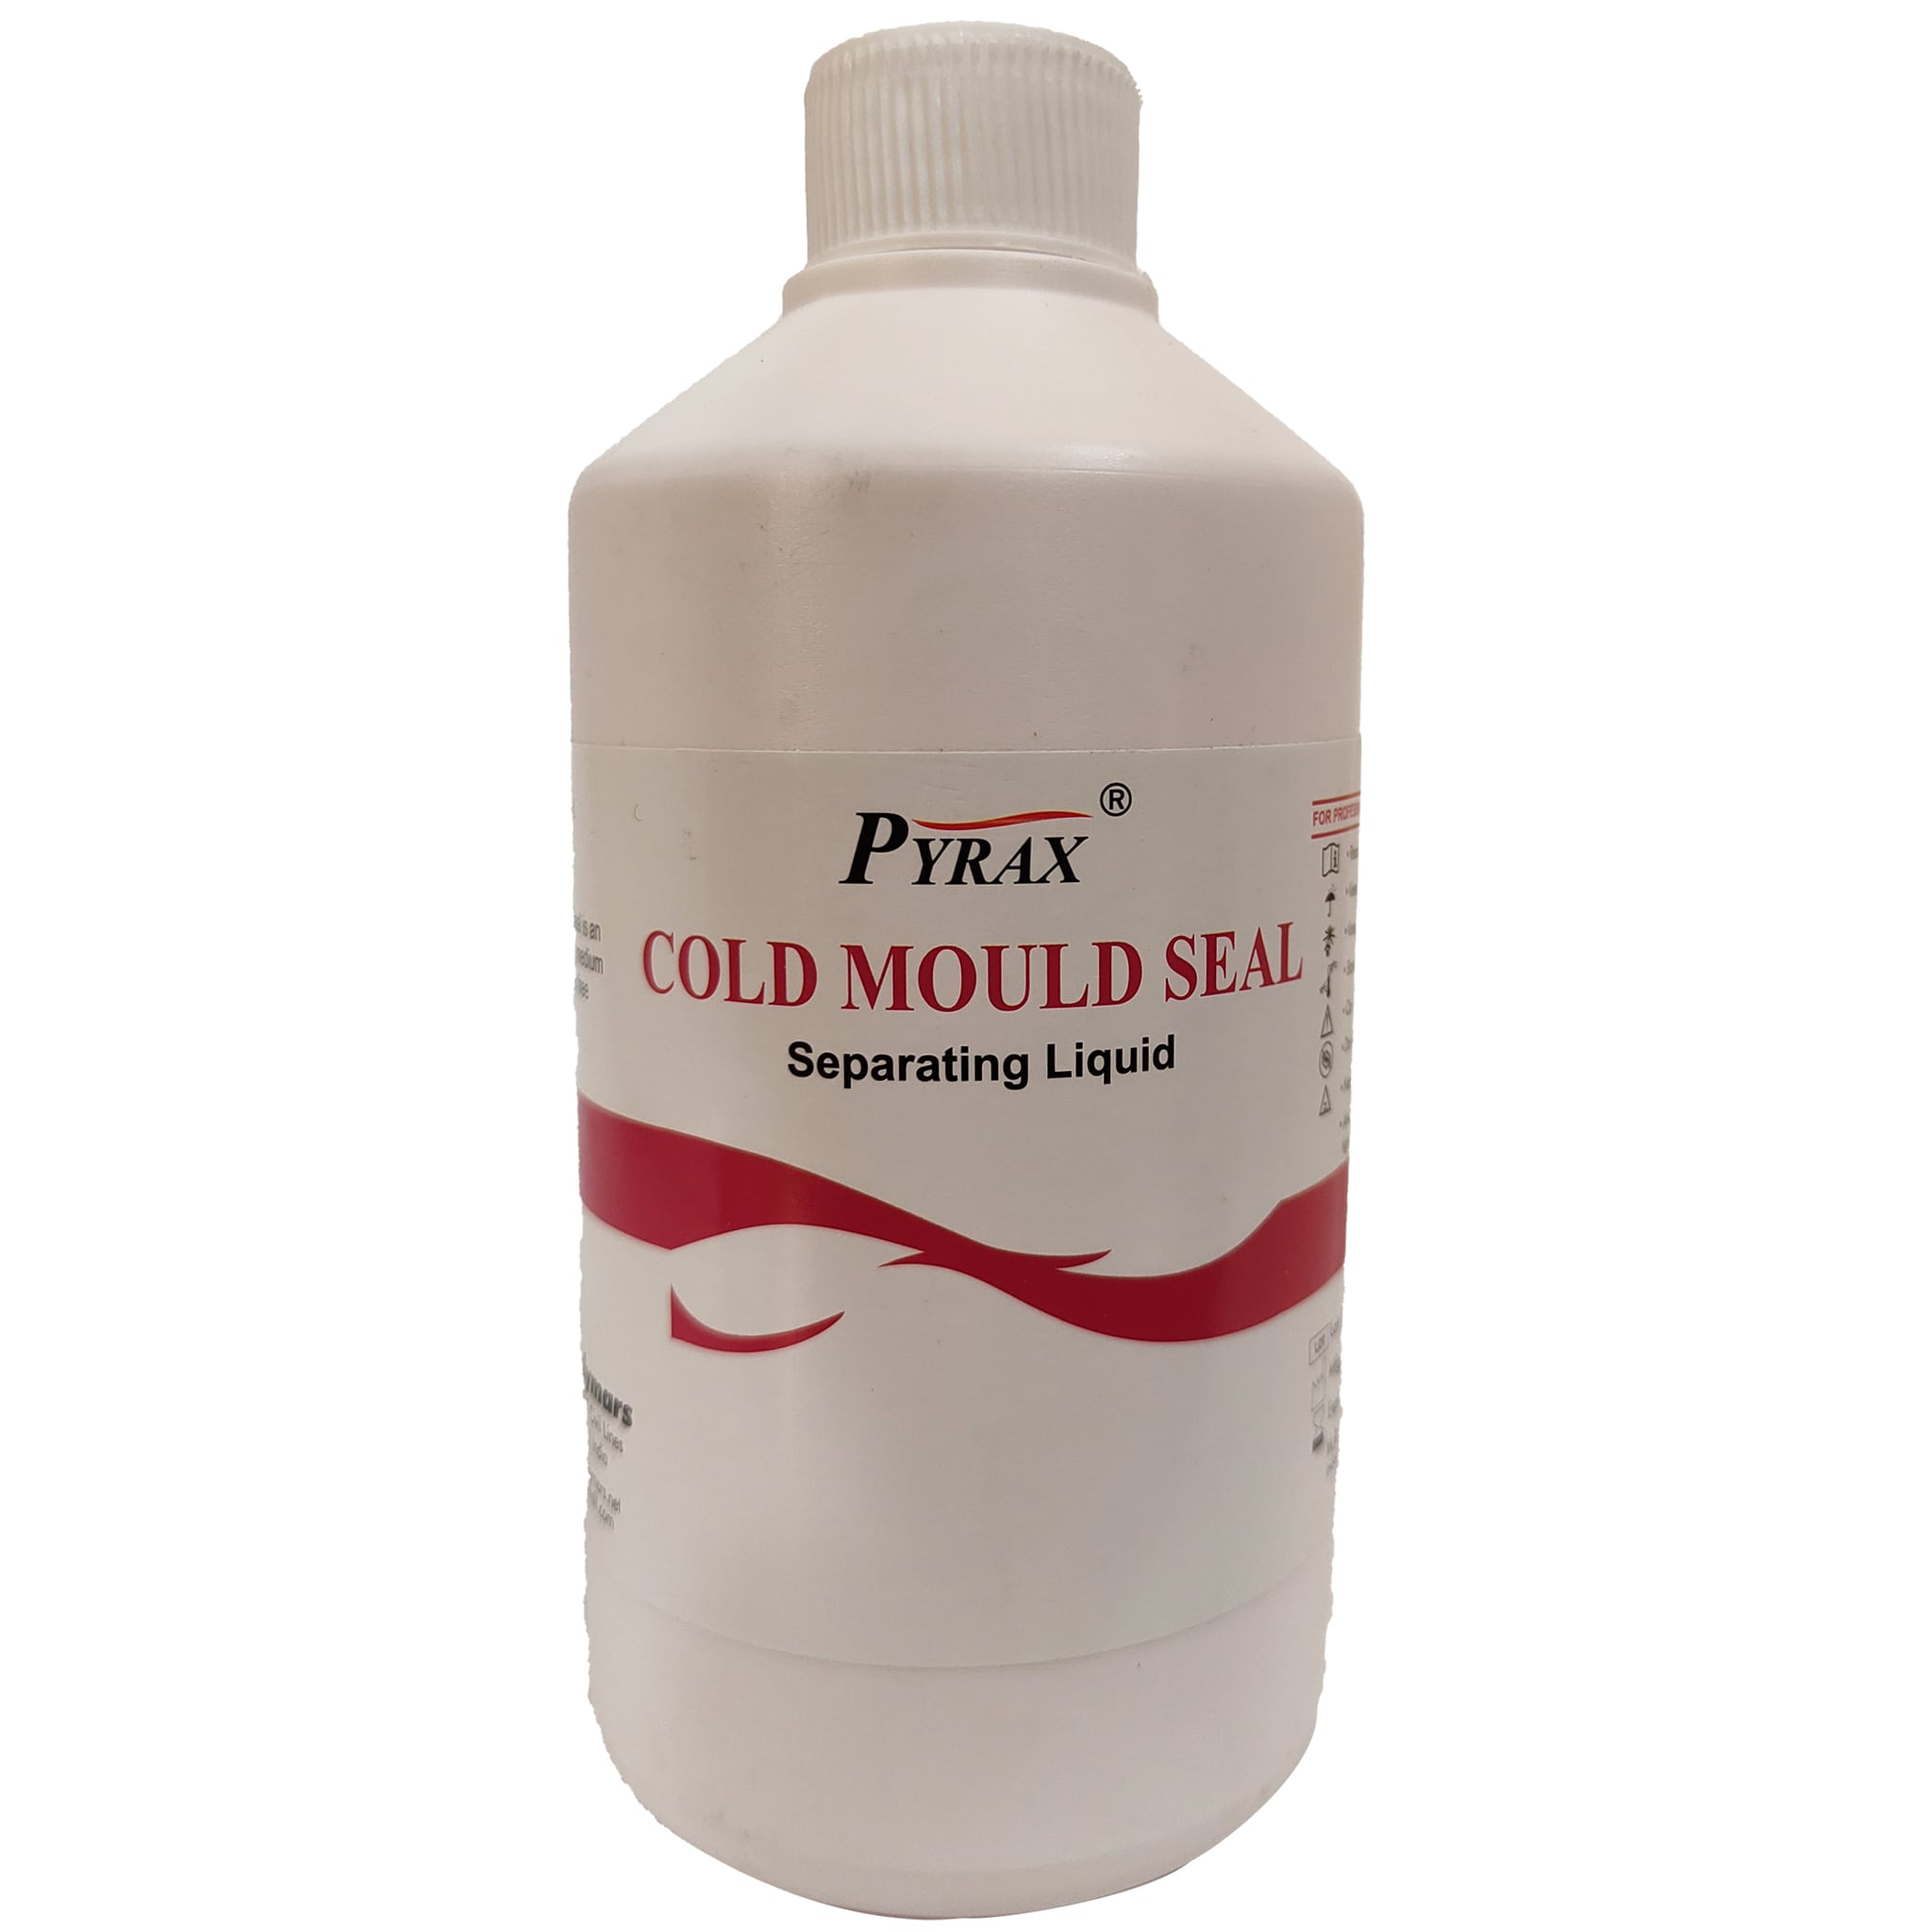 Pyrax Cold Mould Seal